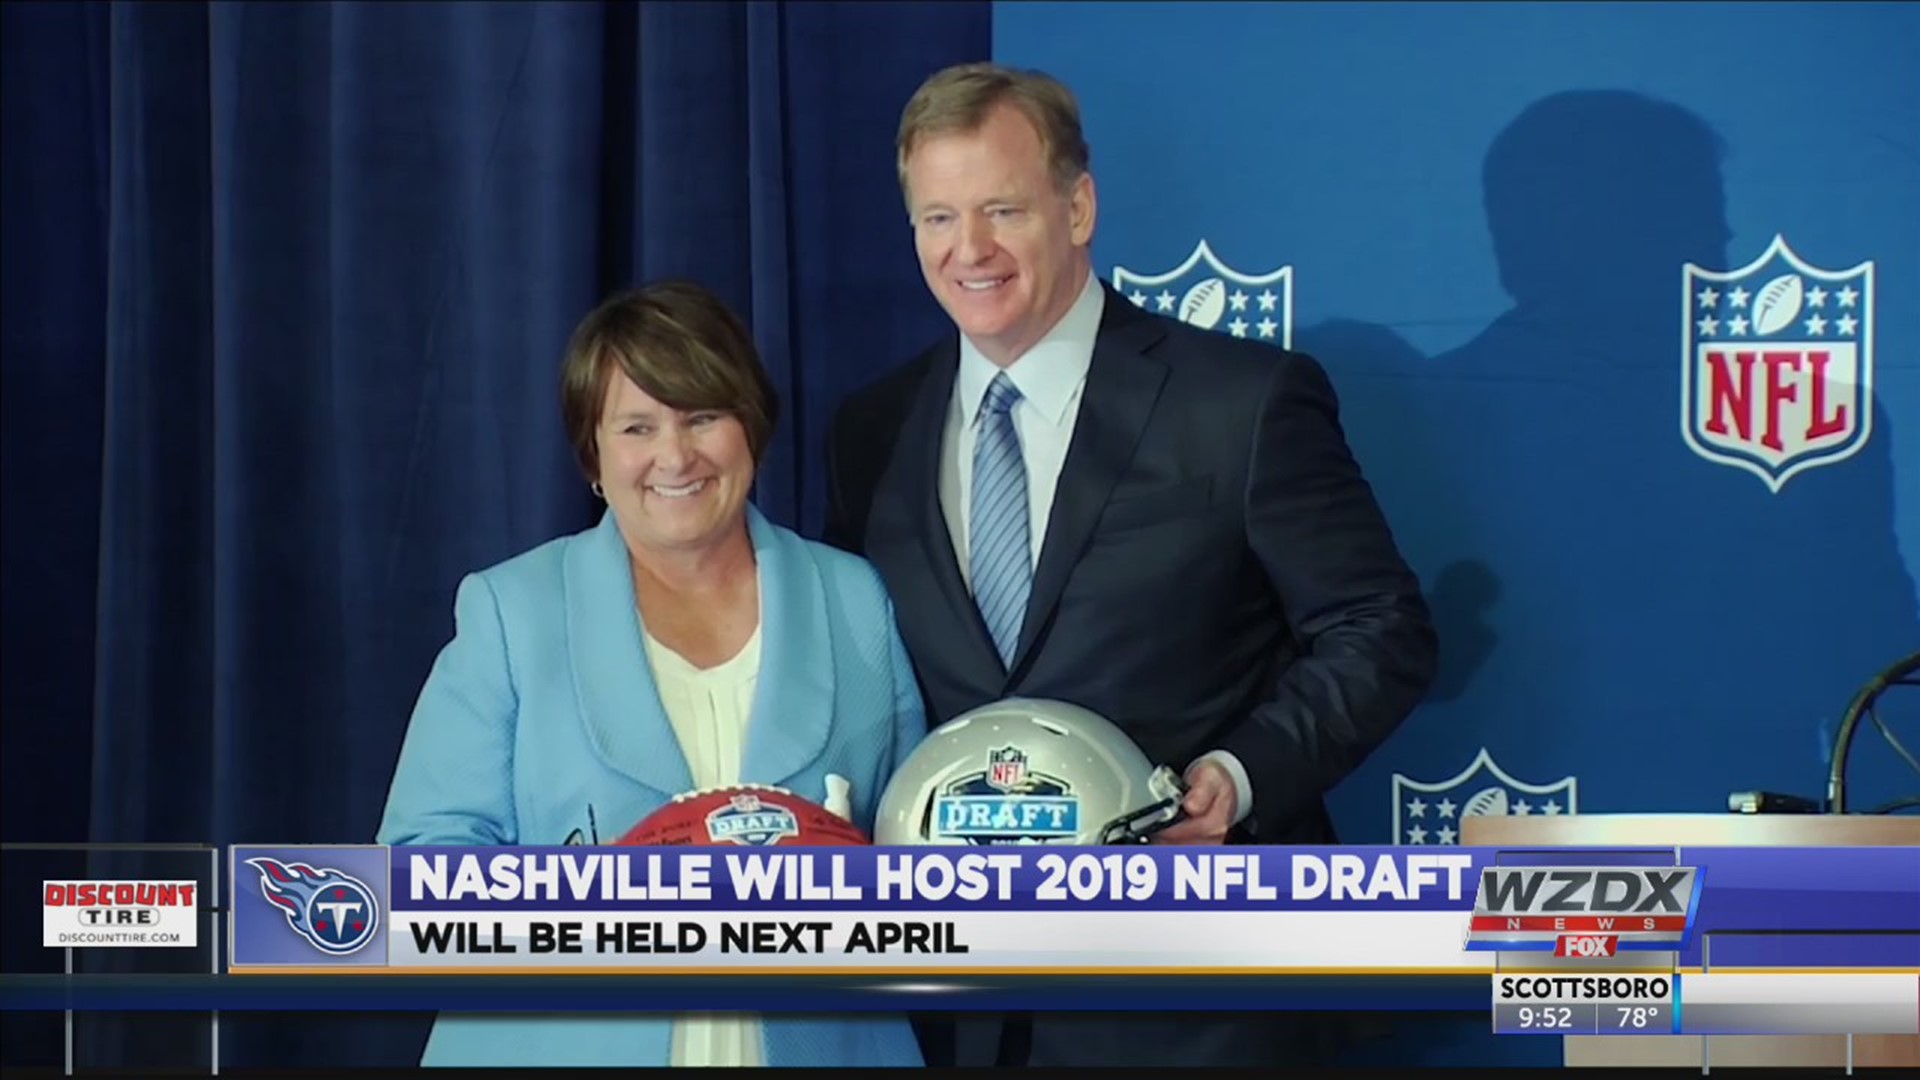 The NFL draft is heading to the Music City. NFL team owners approved the Tennessee Titans' bid to host the 2019 NFL Draft in Nashville.